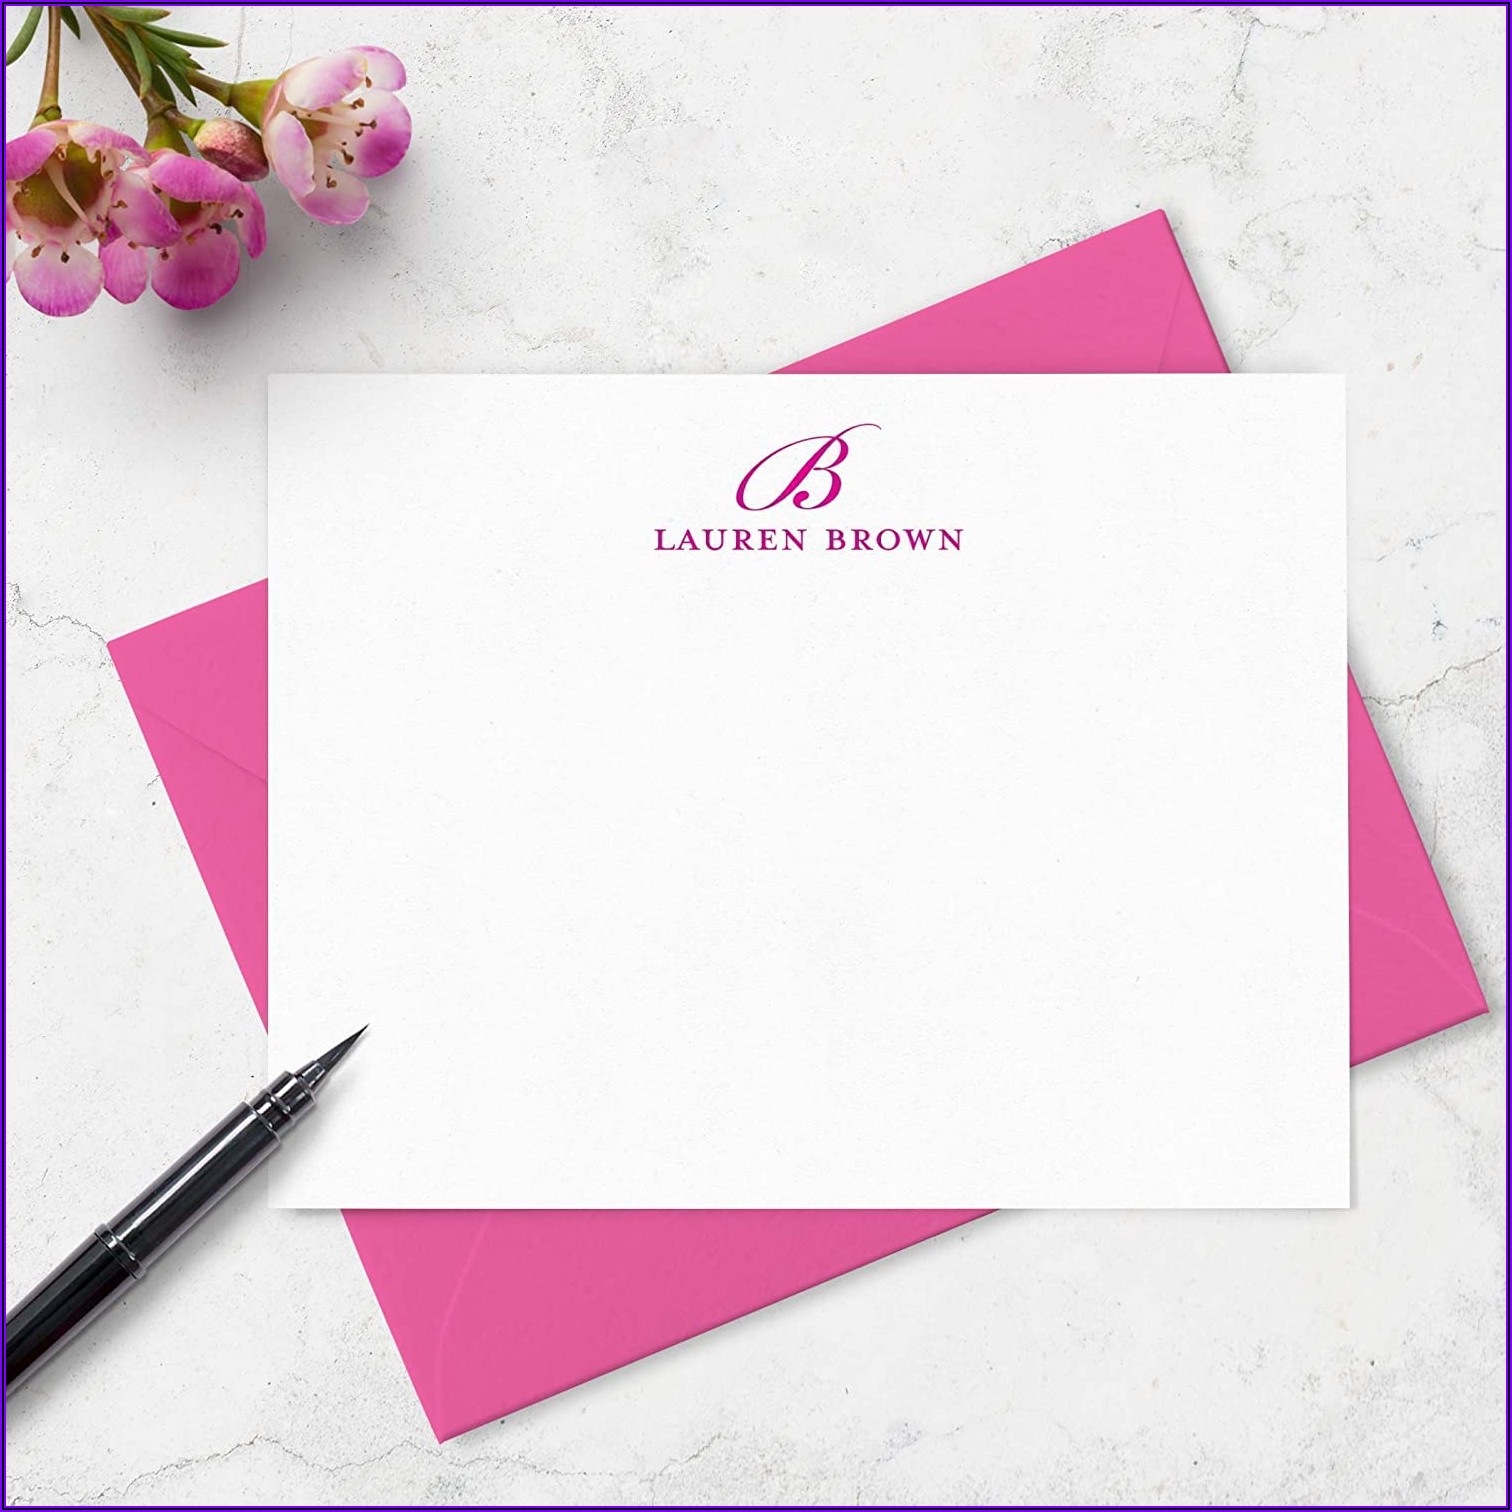 Monogrammed Note Cards And Envelopes